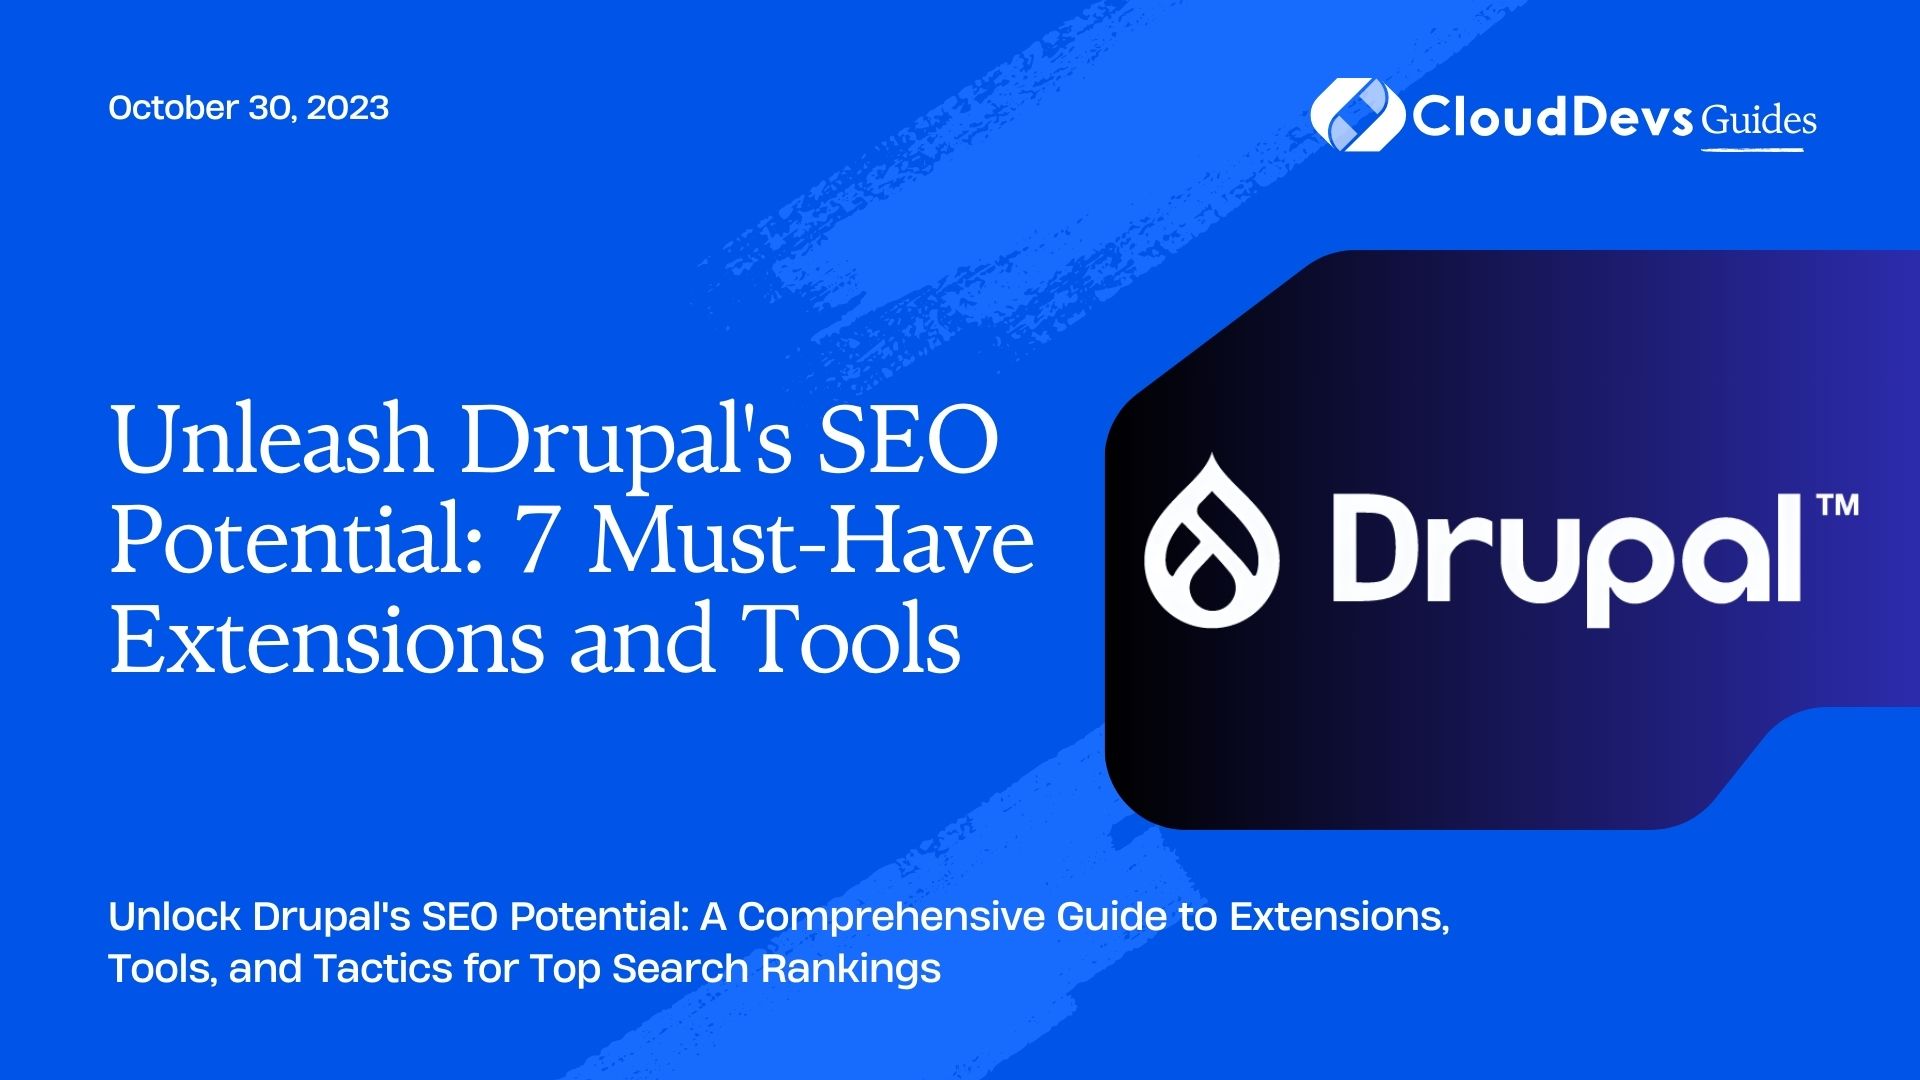 Unleash Drupal's SEO Potential: 7 Must-Have Extensions and Tools